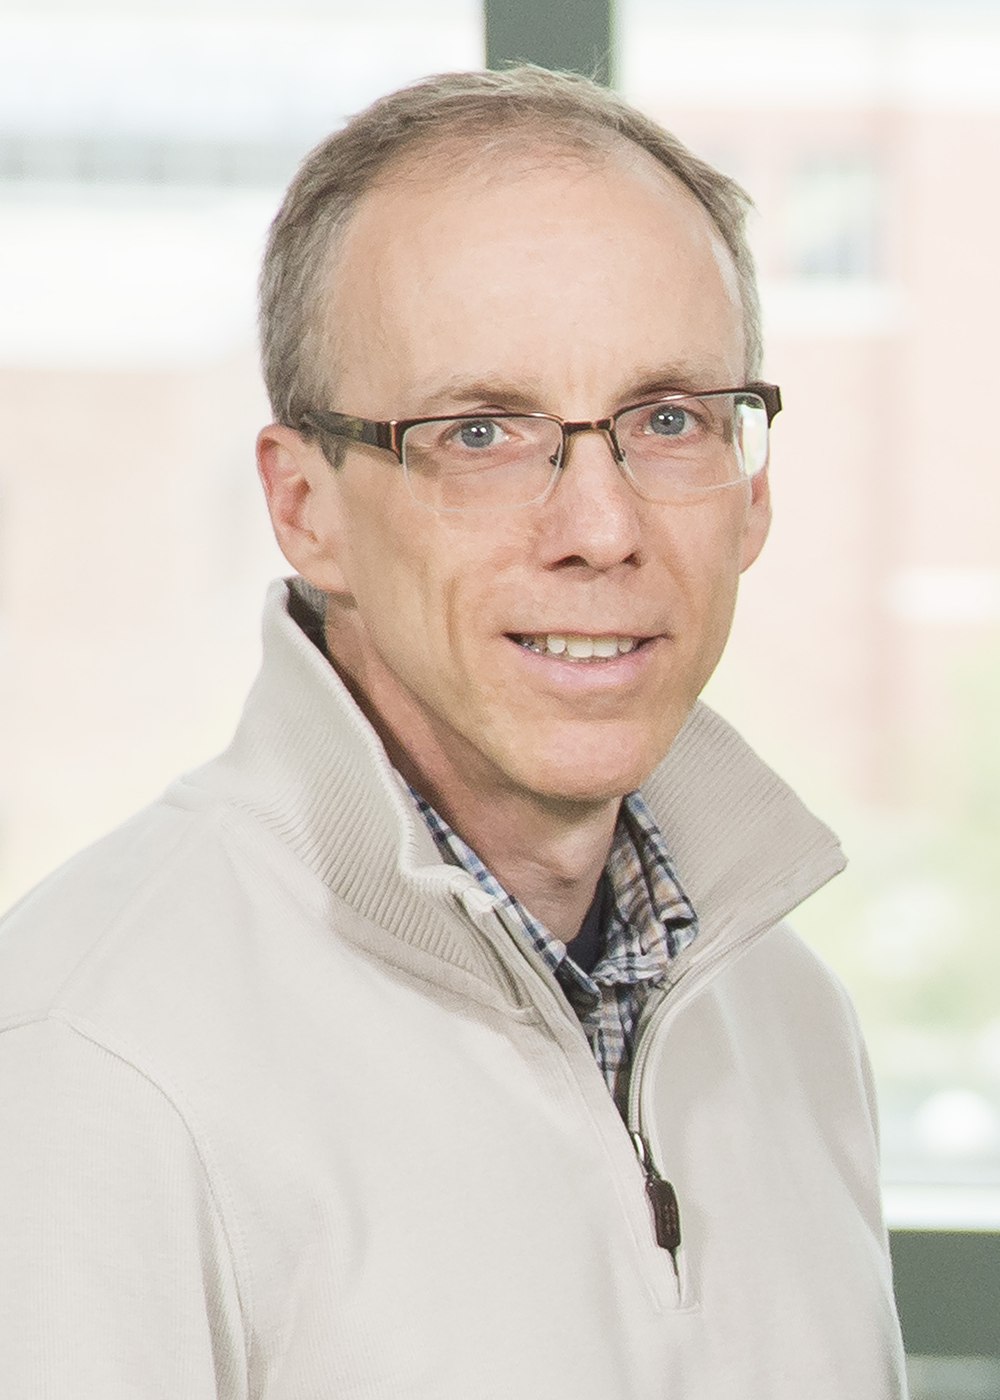 Jeffrey Moore has received the Stephanie L. Kwolek Award for exceptional contributions to the field of materials chemistry.